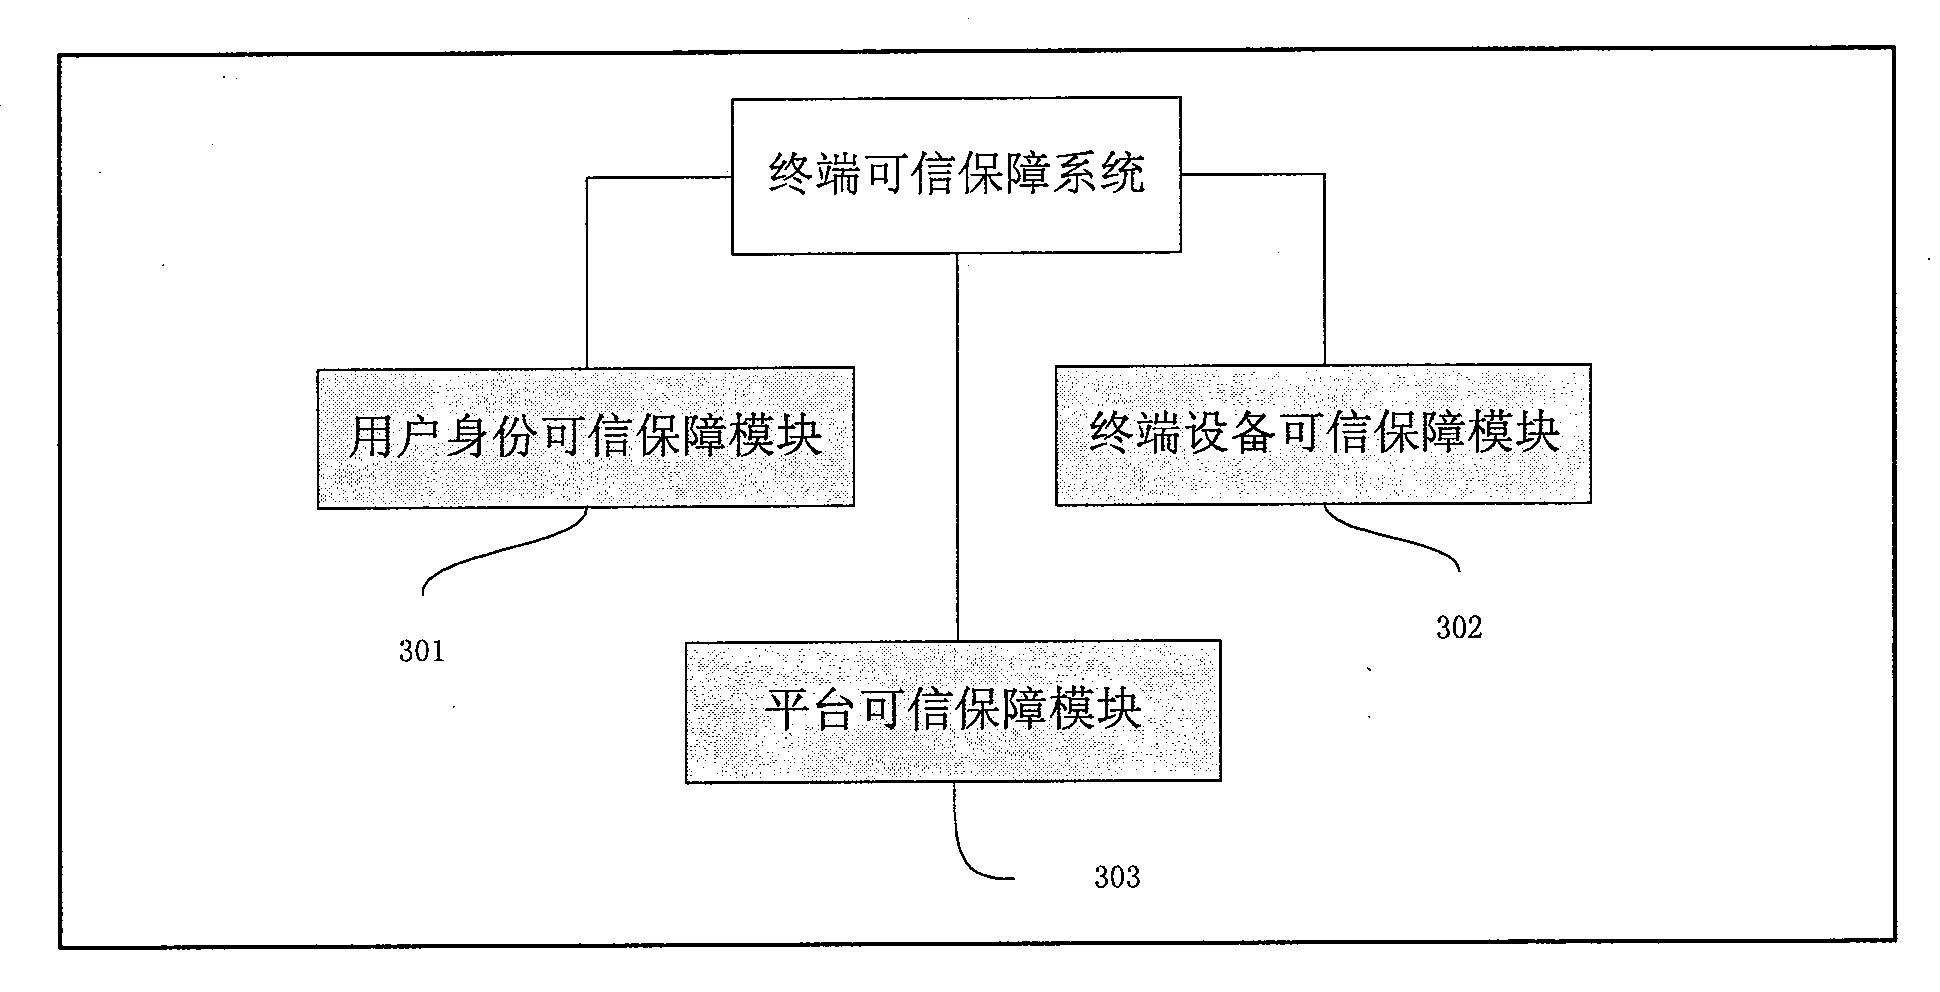 Terminal credible security system and method based on credible computing